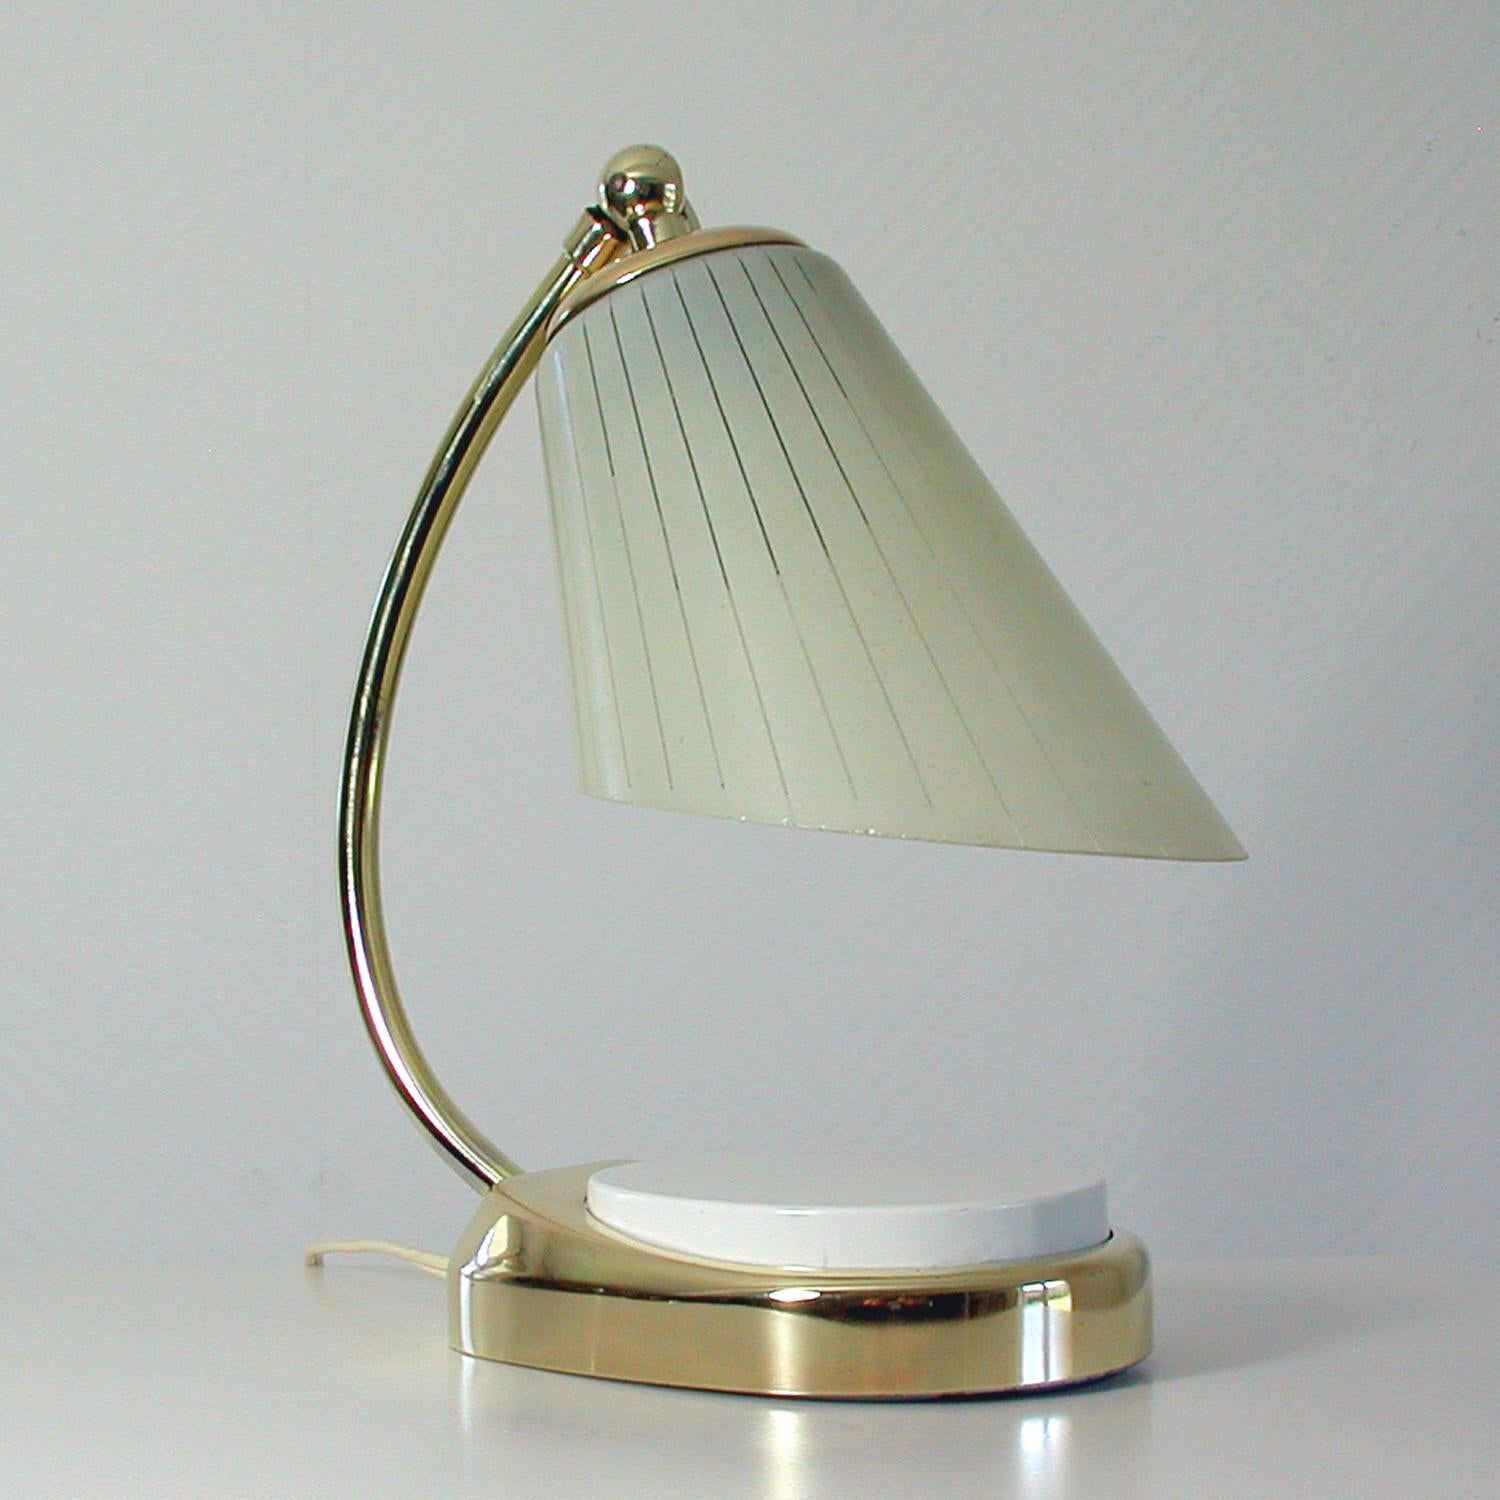 The predecessor of this vintage table light was designed by Marianne Brandt during the Bauhaus period 19 the 1930s and manufactured in Germany in the 1960s (gmf /mewa /ruppelwerke typ 7404). It has got a brass base, a brass lamp arm and an